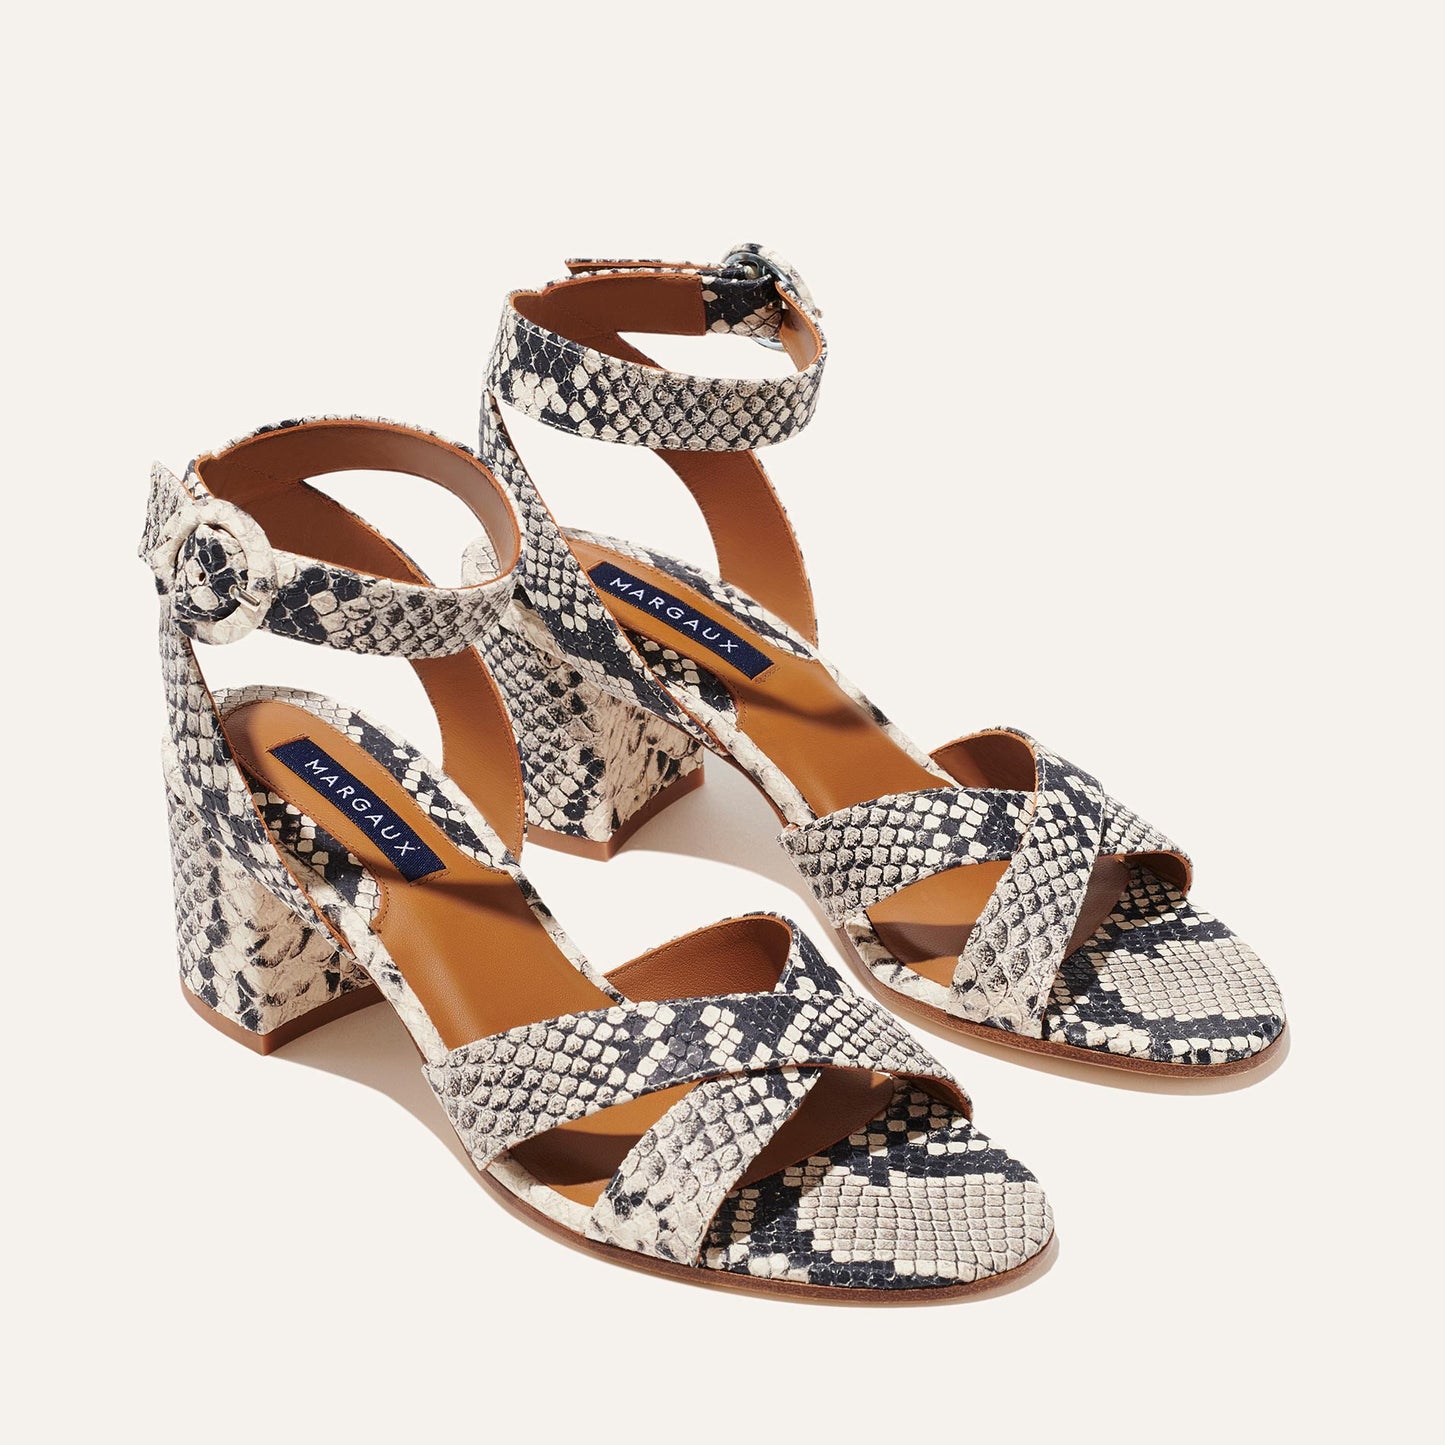 The City Sandal - Natural Python Embossed